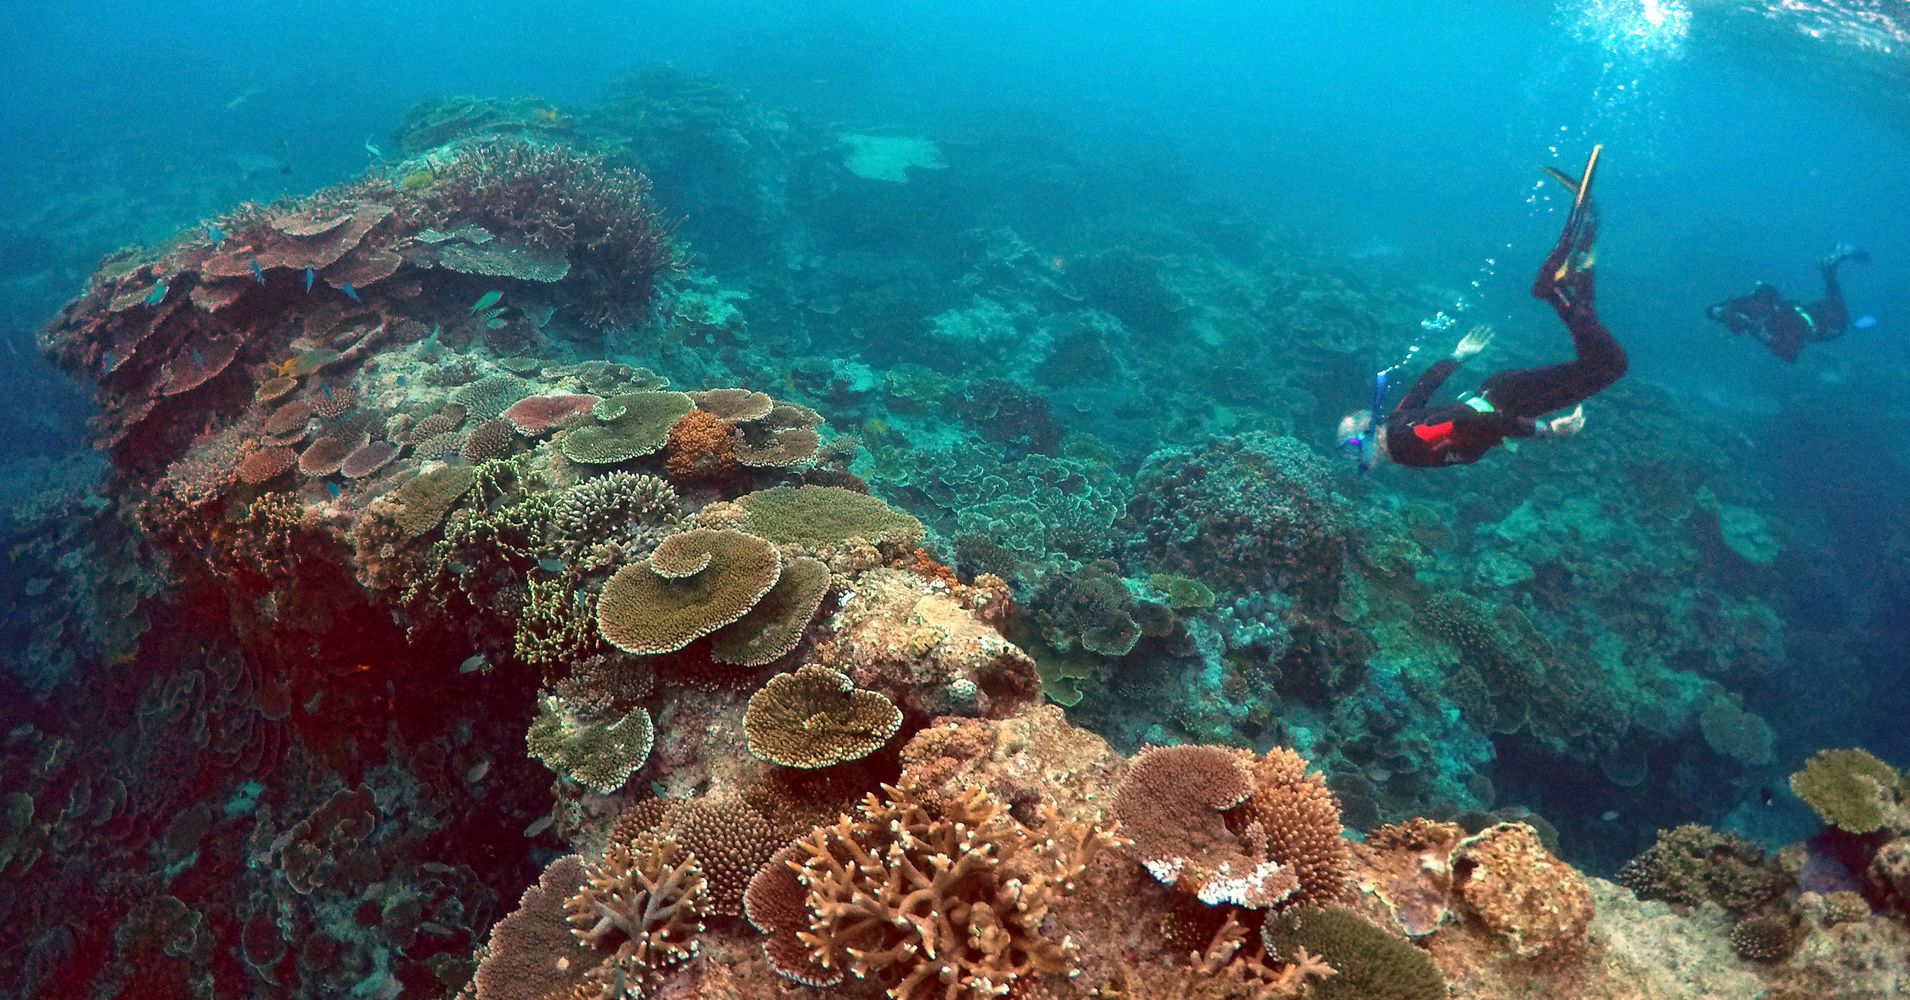 Coral Reefs In Trouble - The Canaries In The Coal Mine | HuffPost